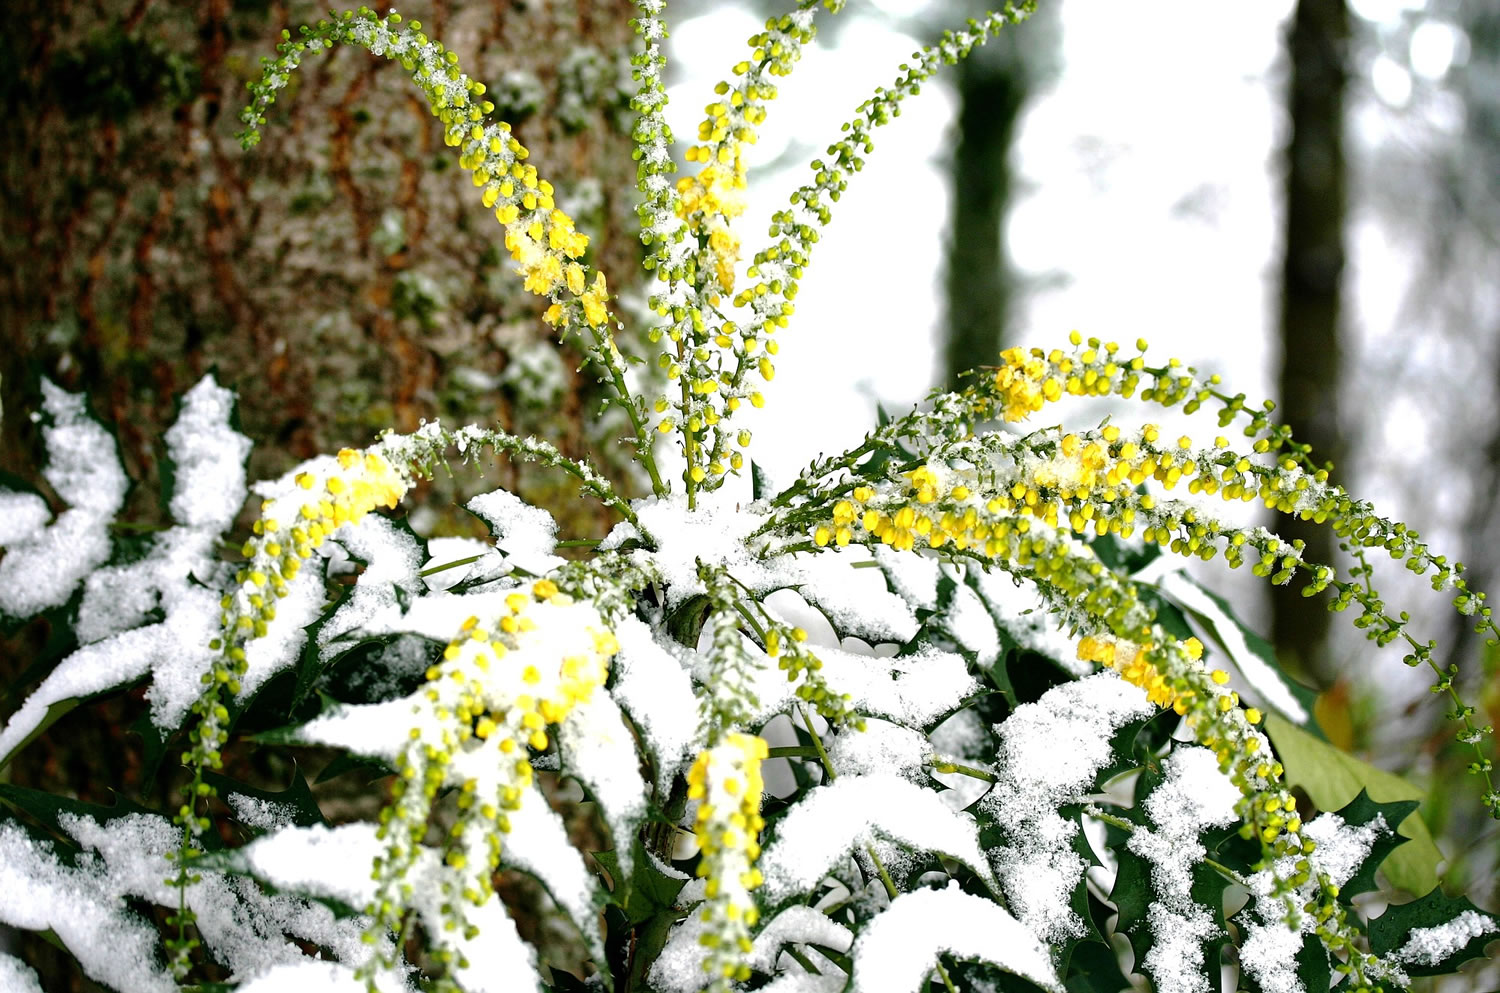 Mahonia aquifolium, or Oregon grape, shares a bouquet of yellow blooms in midwinter.